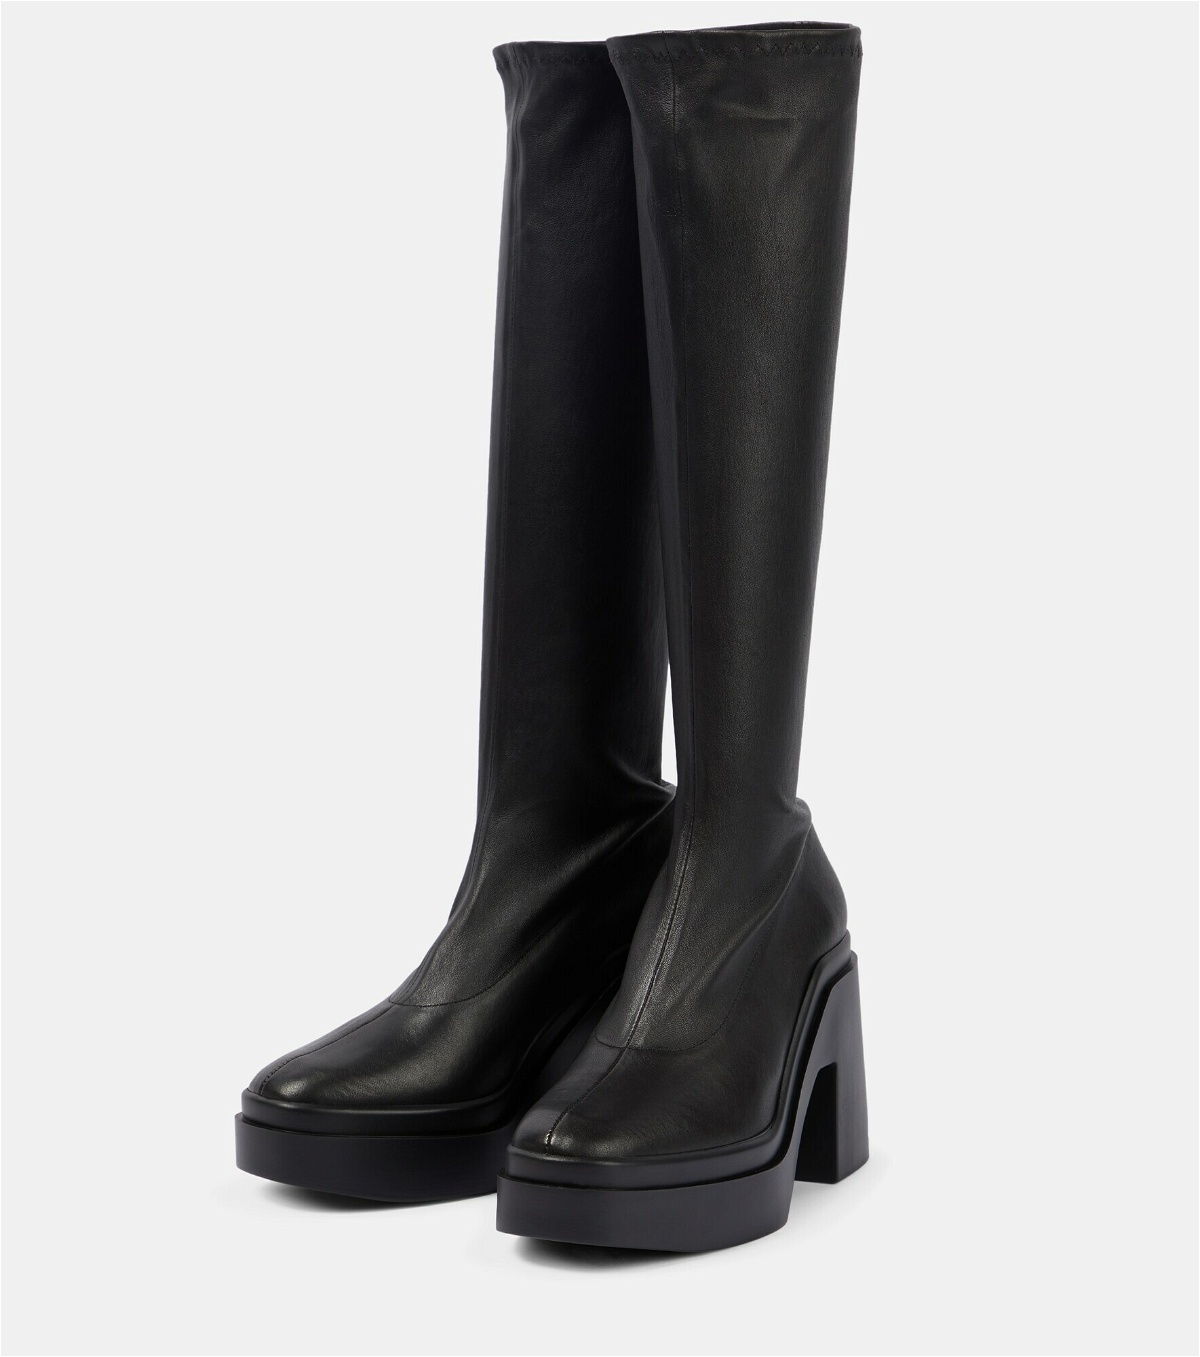 Clergerie - Nellya leather knee-high boots Clergerie